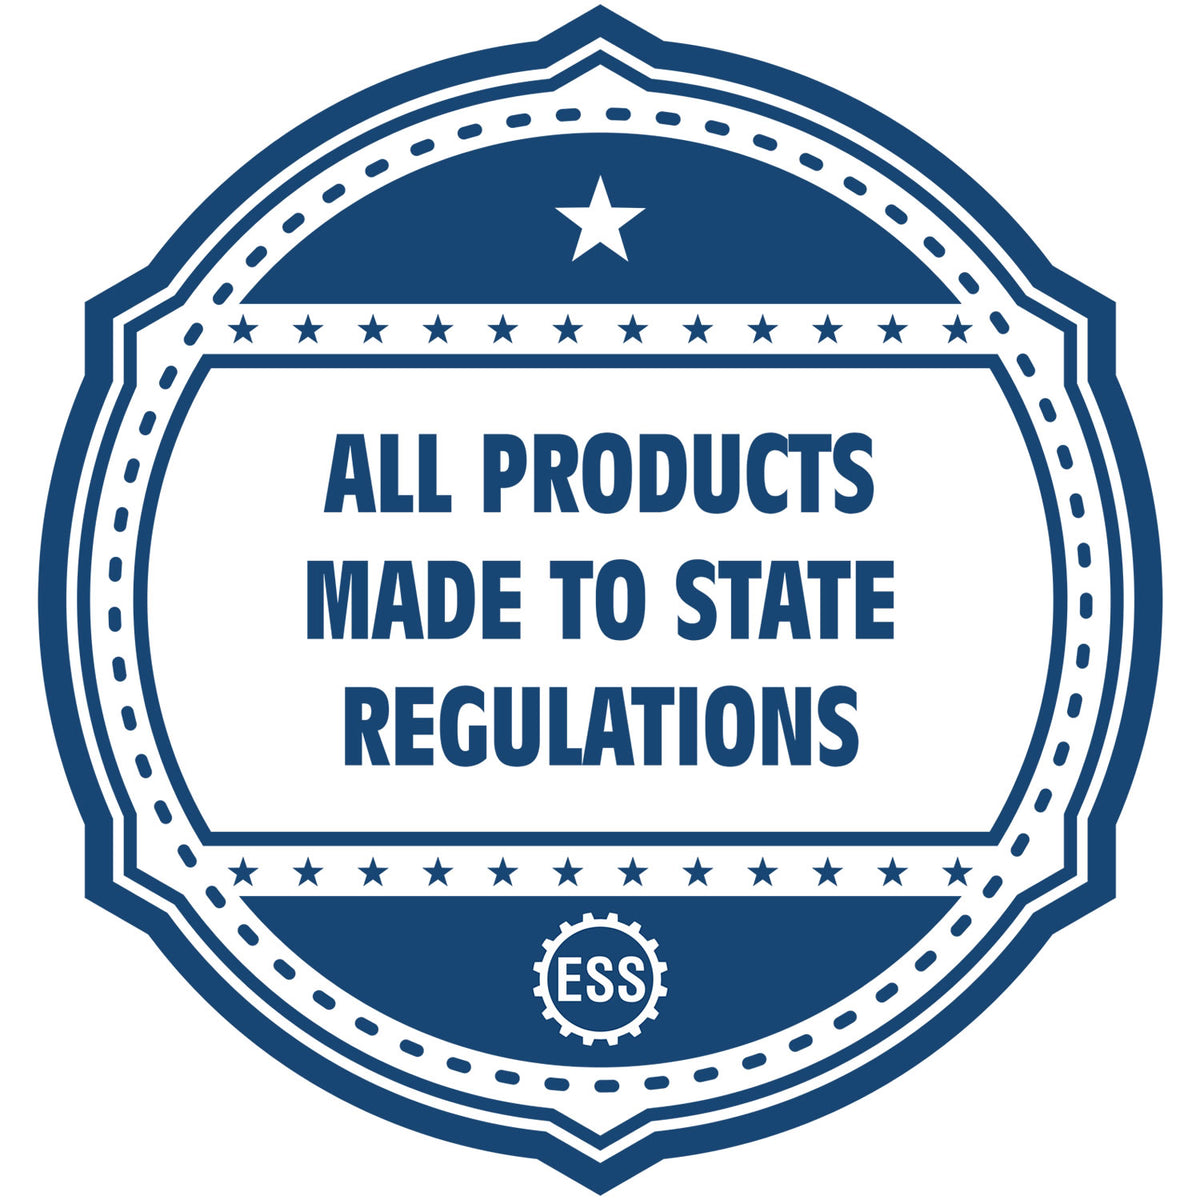 An icon or badge element for the Slim Pre-Inked Alabama Professional Engineer Seal Stamp showing that this product is made in compliance with state regulations.